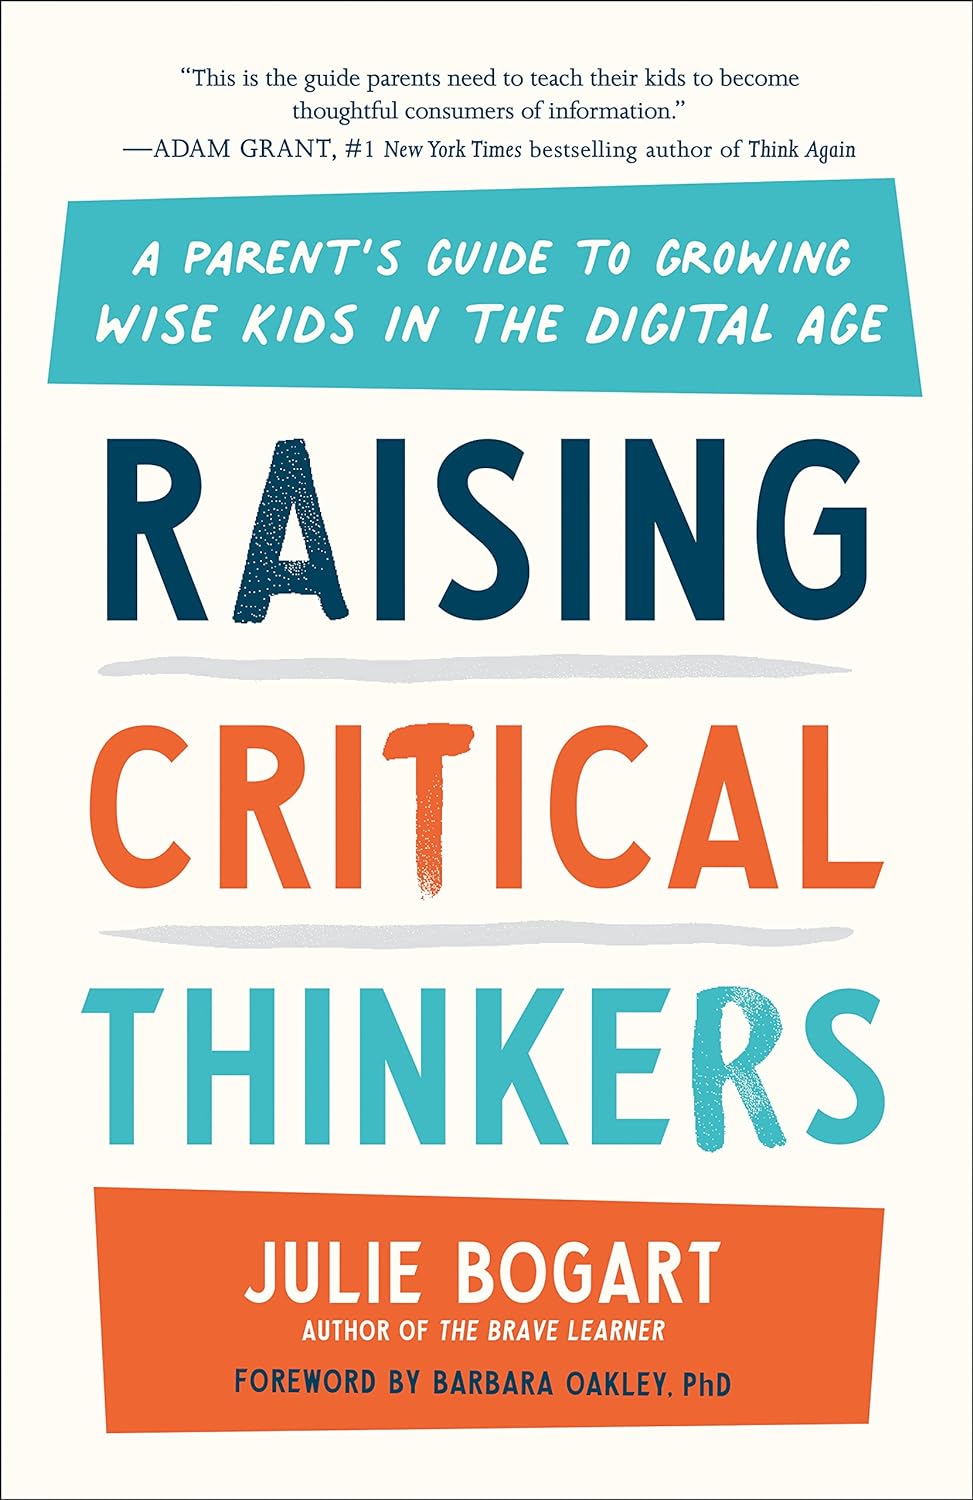 Raising Critical Thinkers - Paperback